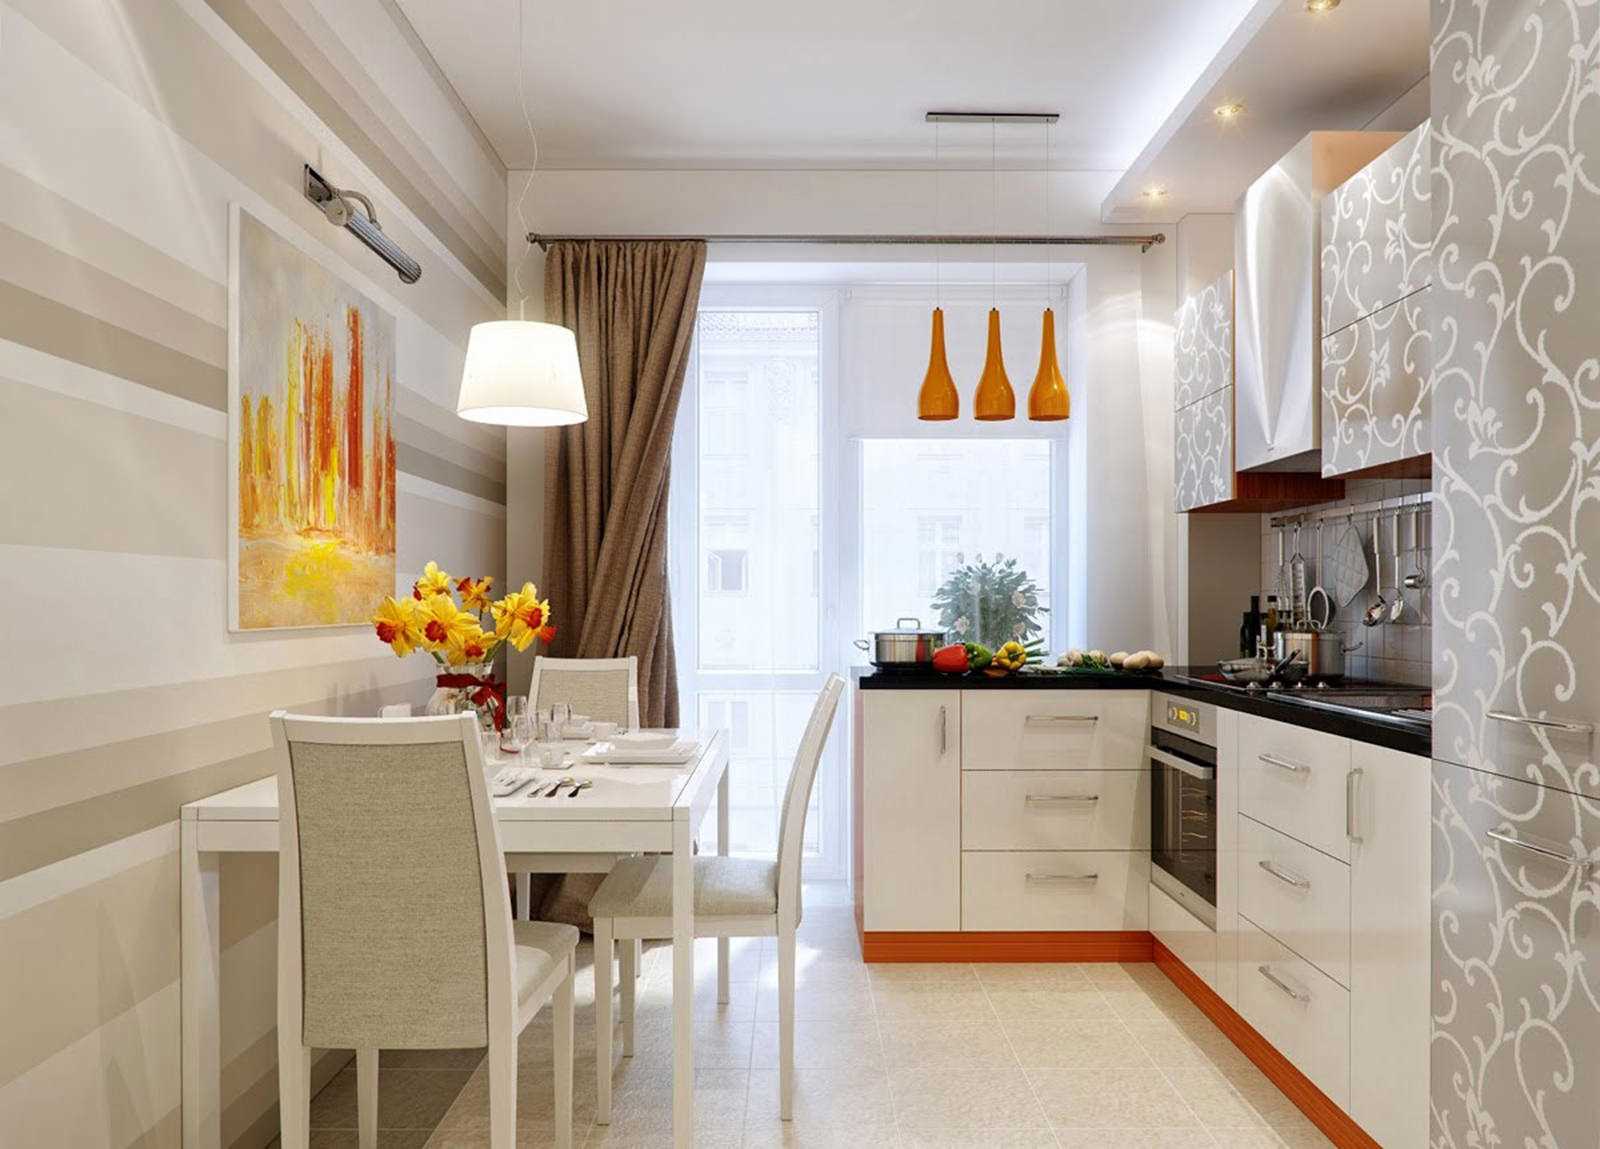 an example of a bright style kitchen 14 sq.m